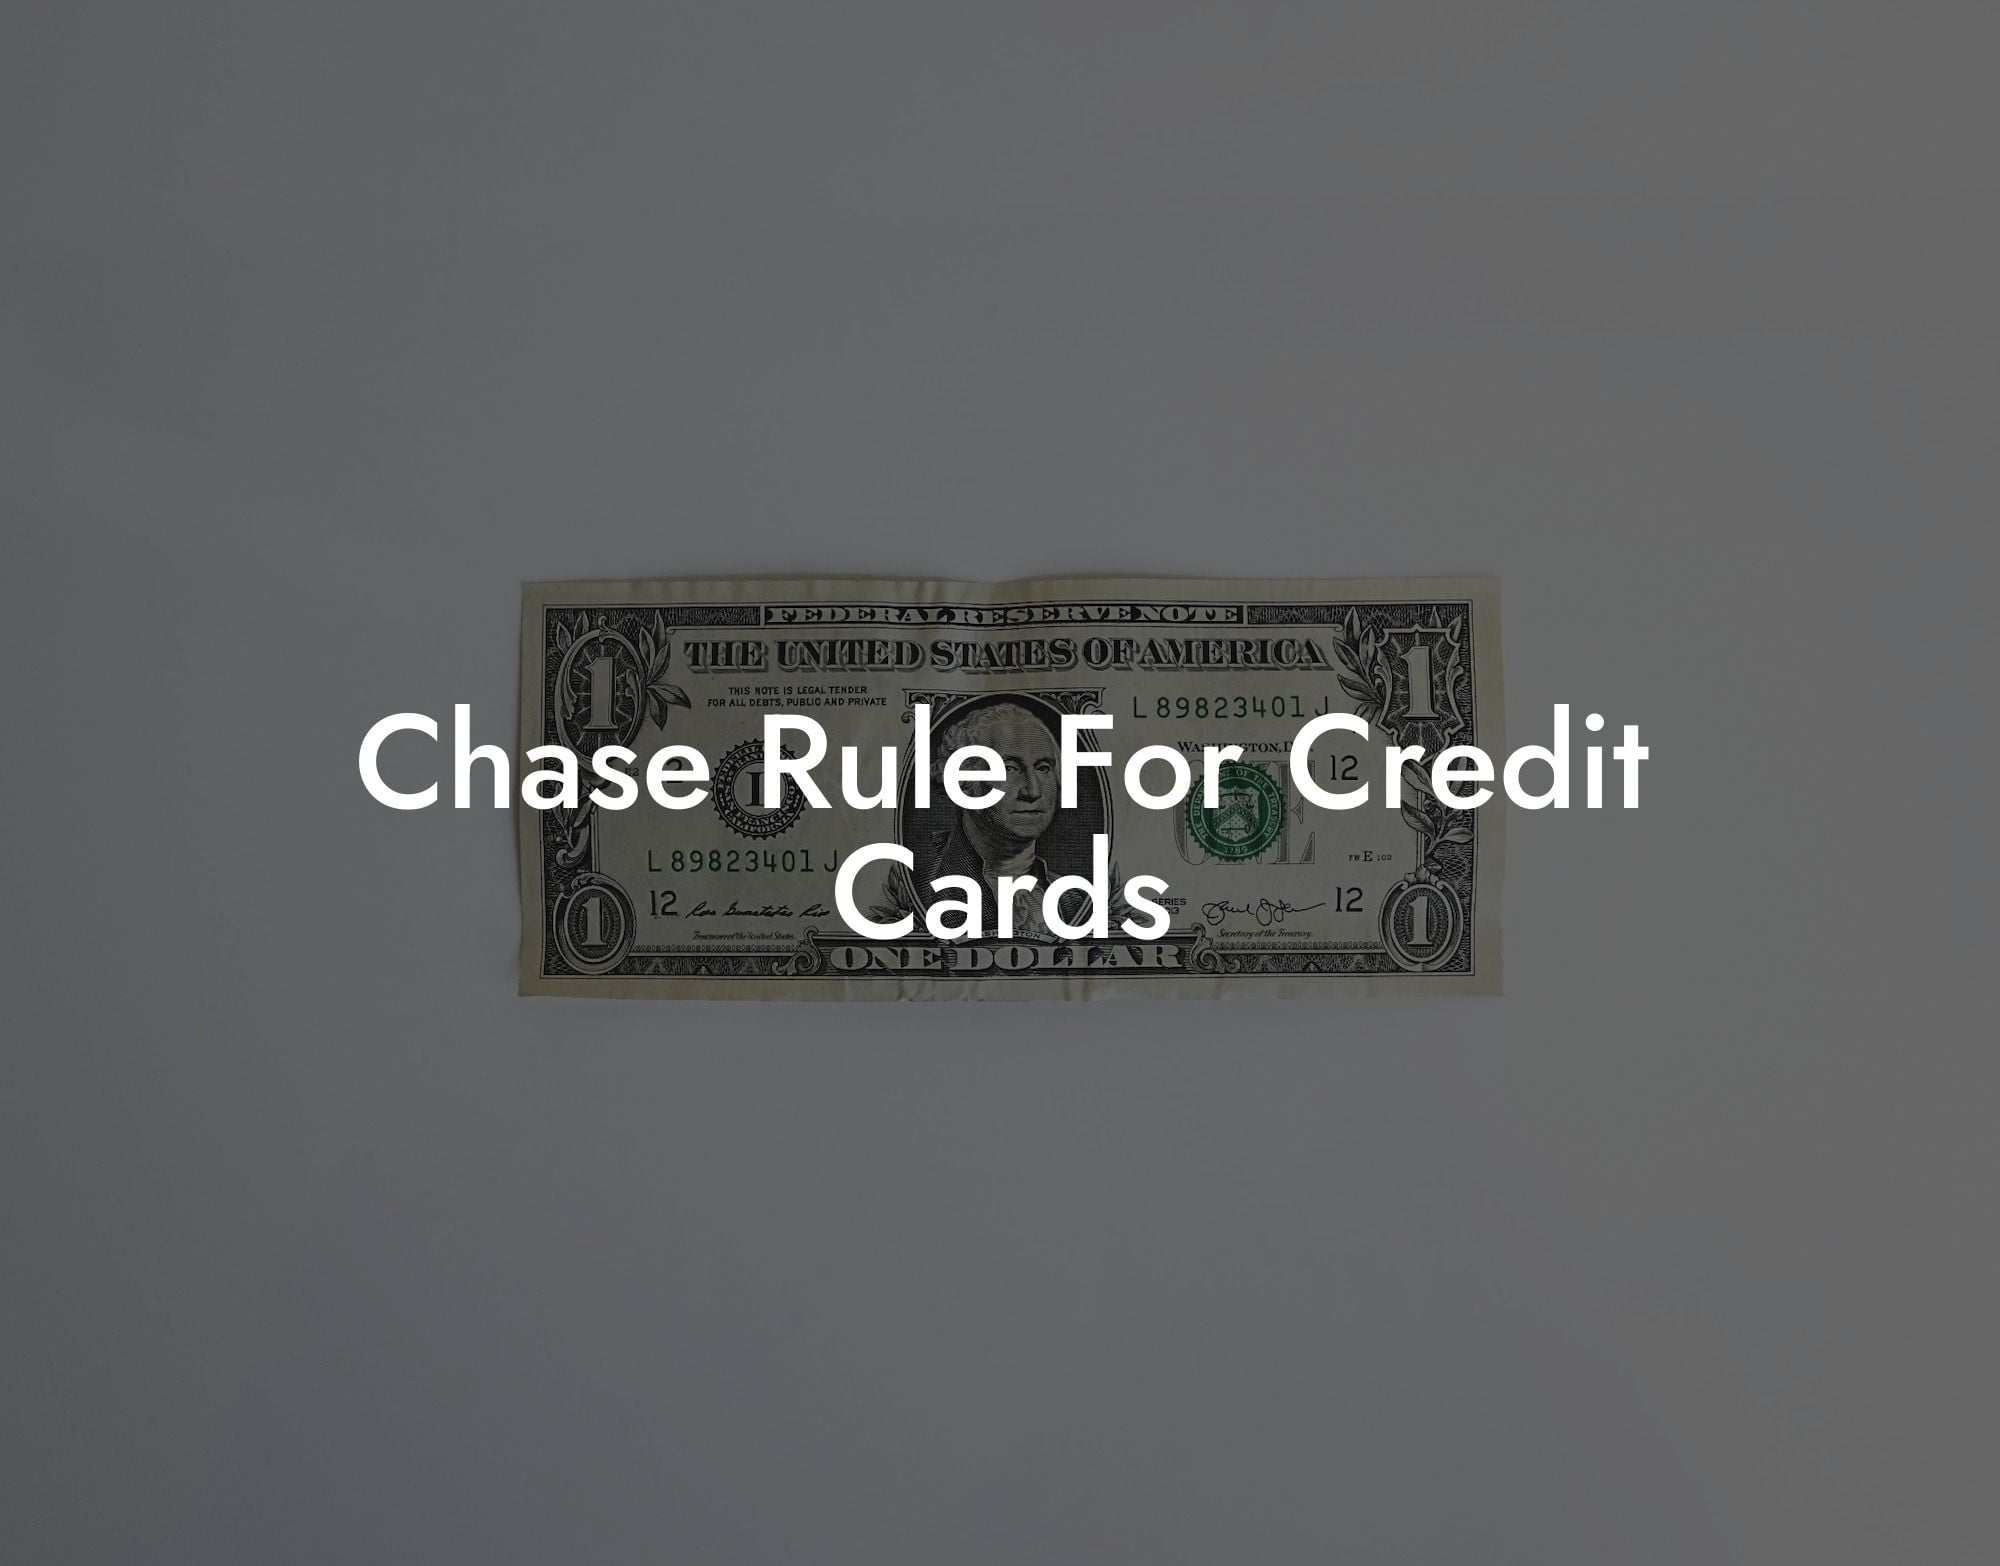 Chase Rule For Credit Cards